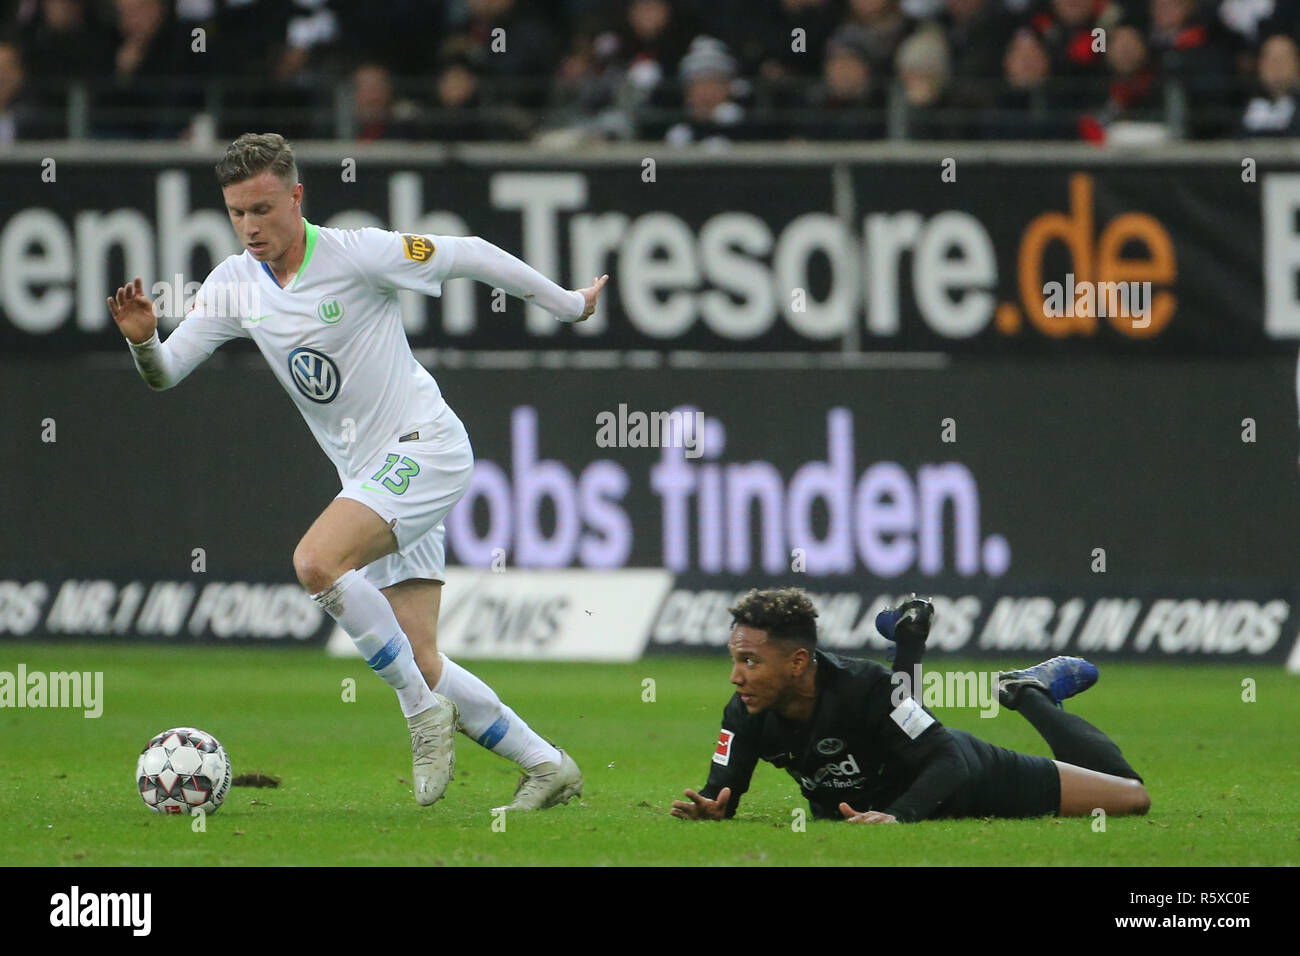 02 December 2018, Hessen, Frankfurt/M.: Soccer: Bundesliga, Eintracht Frankfurt - VfL Wolfsburg, 13th matchday in the Commerzbank Arena. Frankfurt's Jonathan de Guzman (r) and Wolfsburg's Yannick Gerhardt fight for the ball. Photo: Thomas Frey/dpa - IMPORTANT NOTE: In accordance with the requirements of the DFL Deutsche Fußball Liga or the DFB Deutscher Fußball-Bund, it is prohibited to use or have used photographs taken in the stadium and/or the match in the form of sequence images and/or video-like photo sequences. Stock Photo